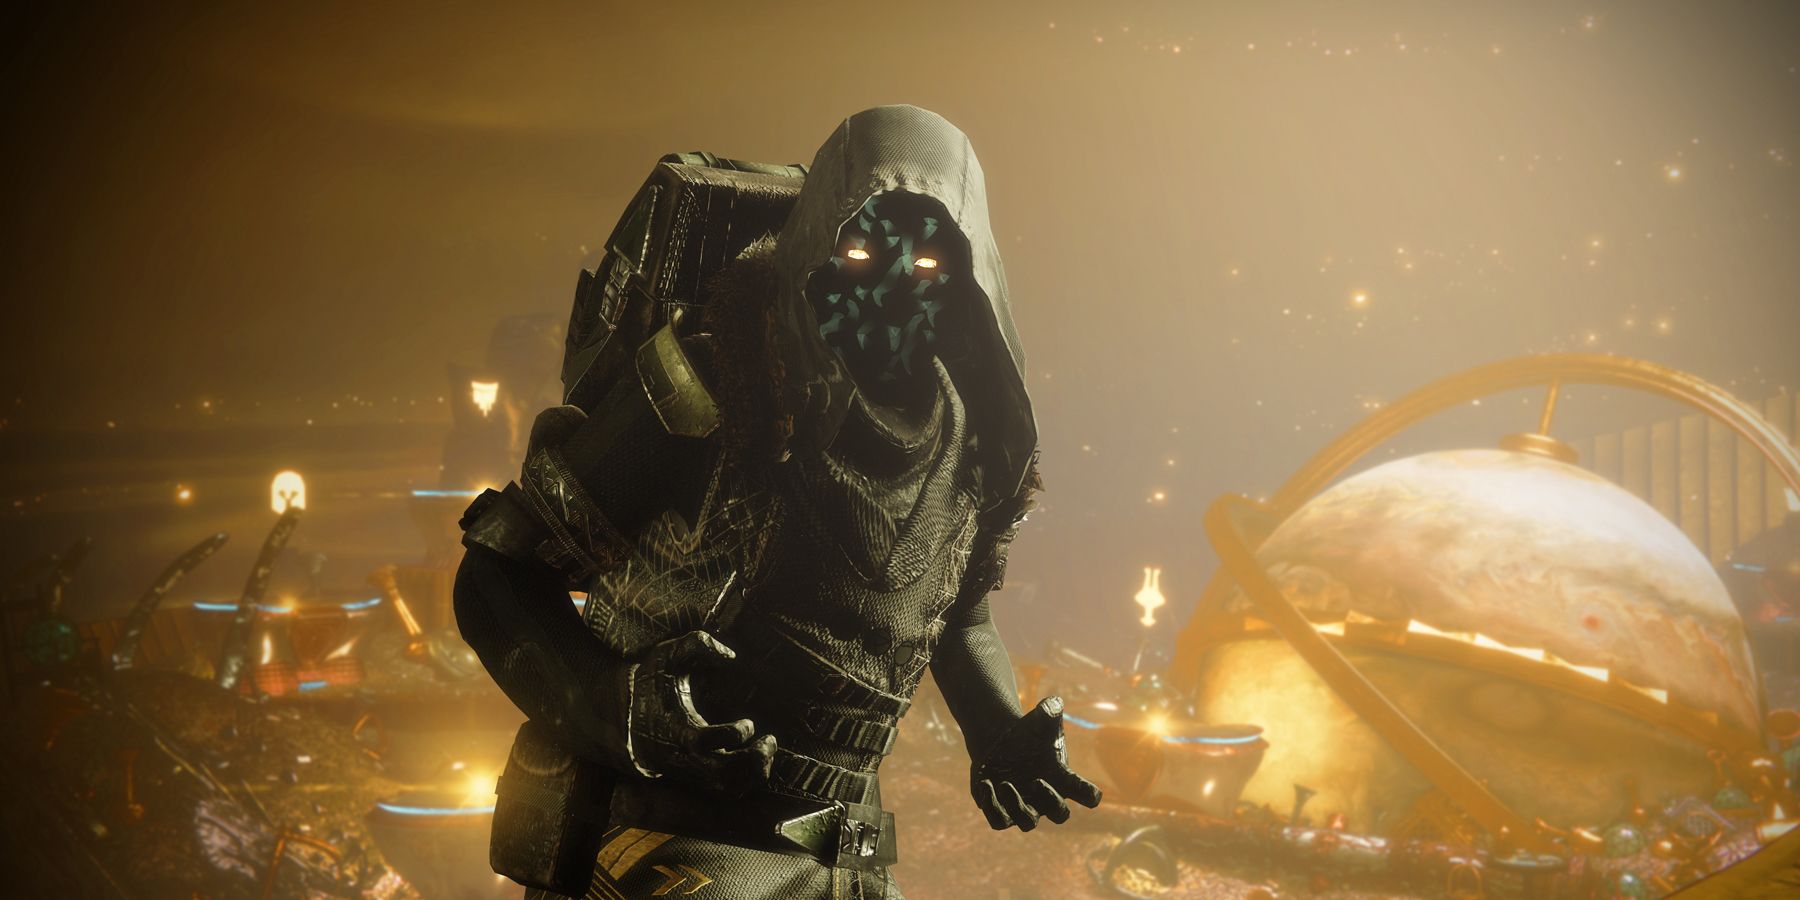 Xur with his treasure chest from Destiny 2.